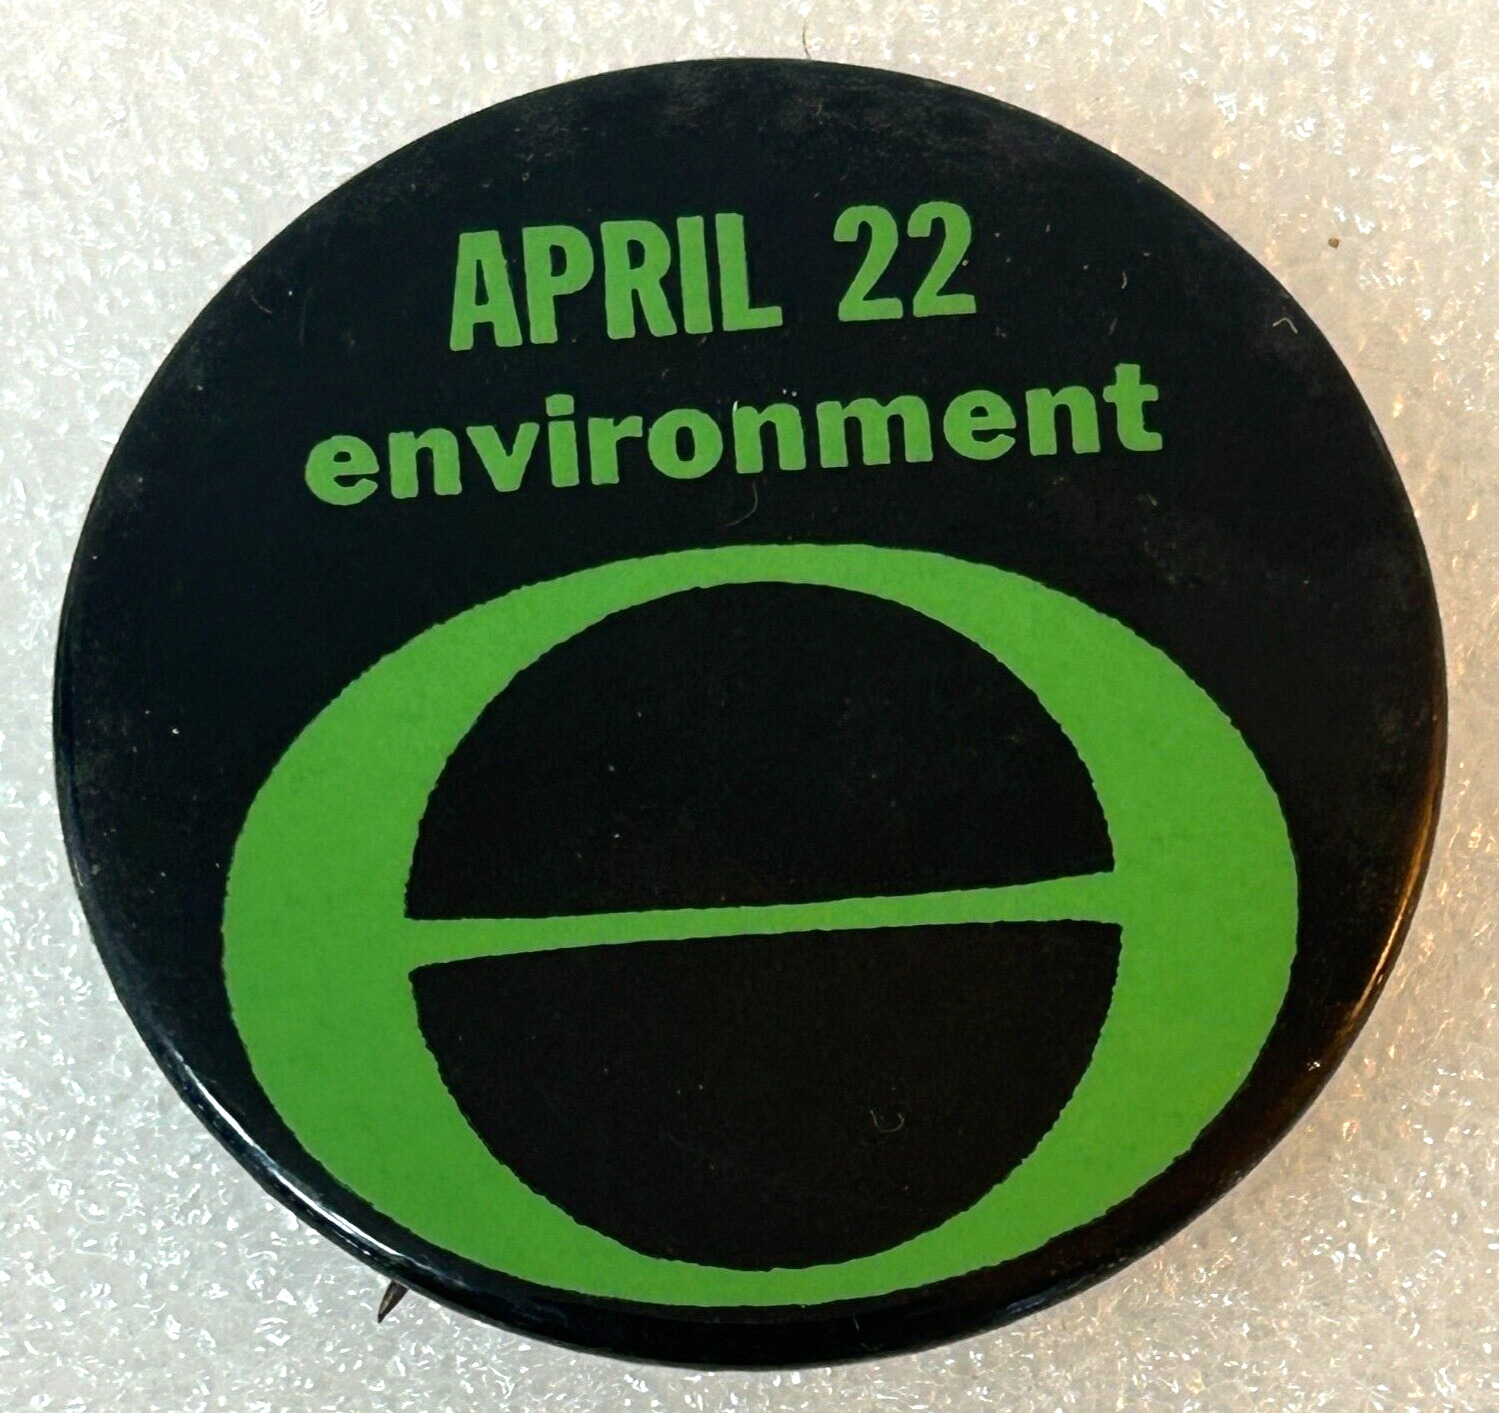 Vintage 1970 First Earth Day April 22 Environment Pinback Pin Button